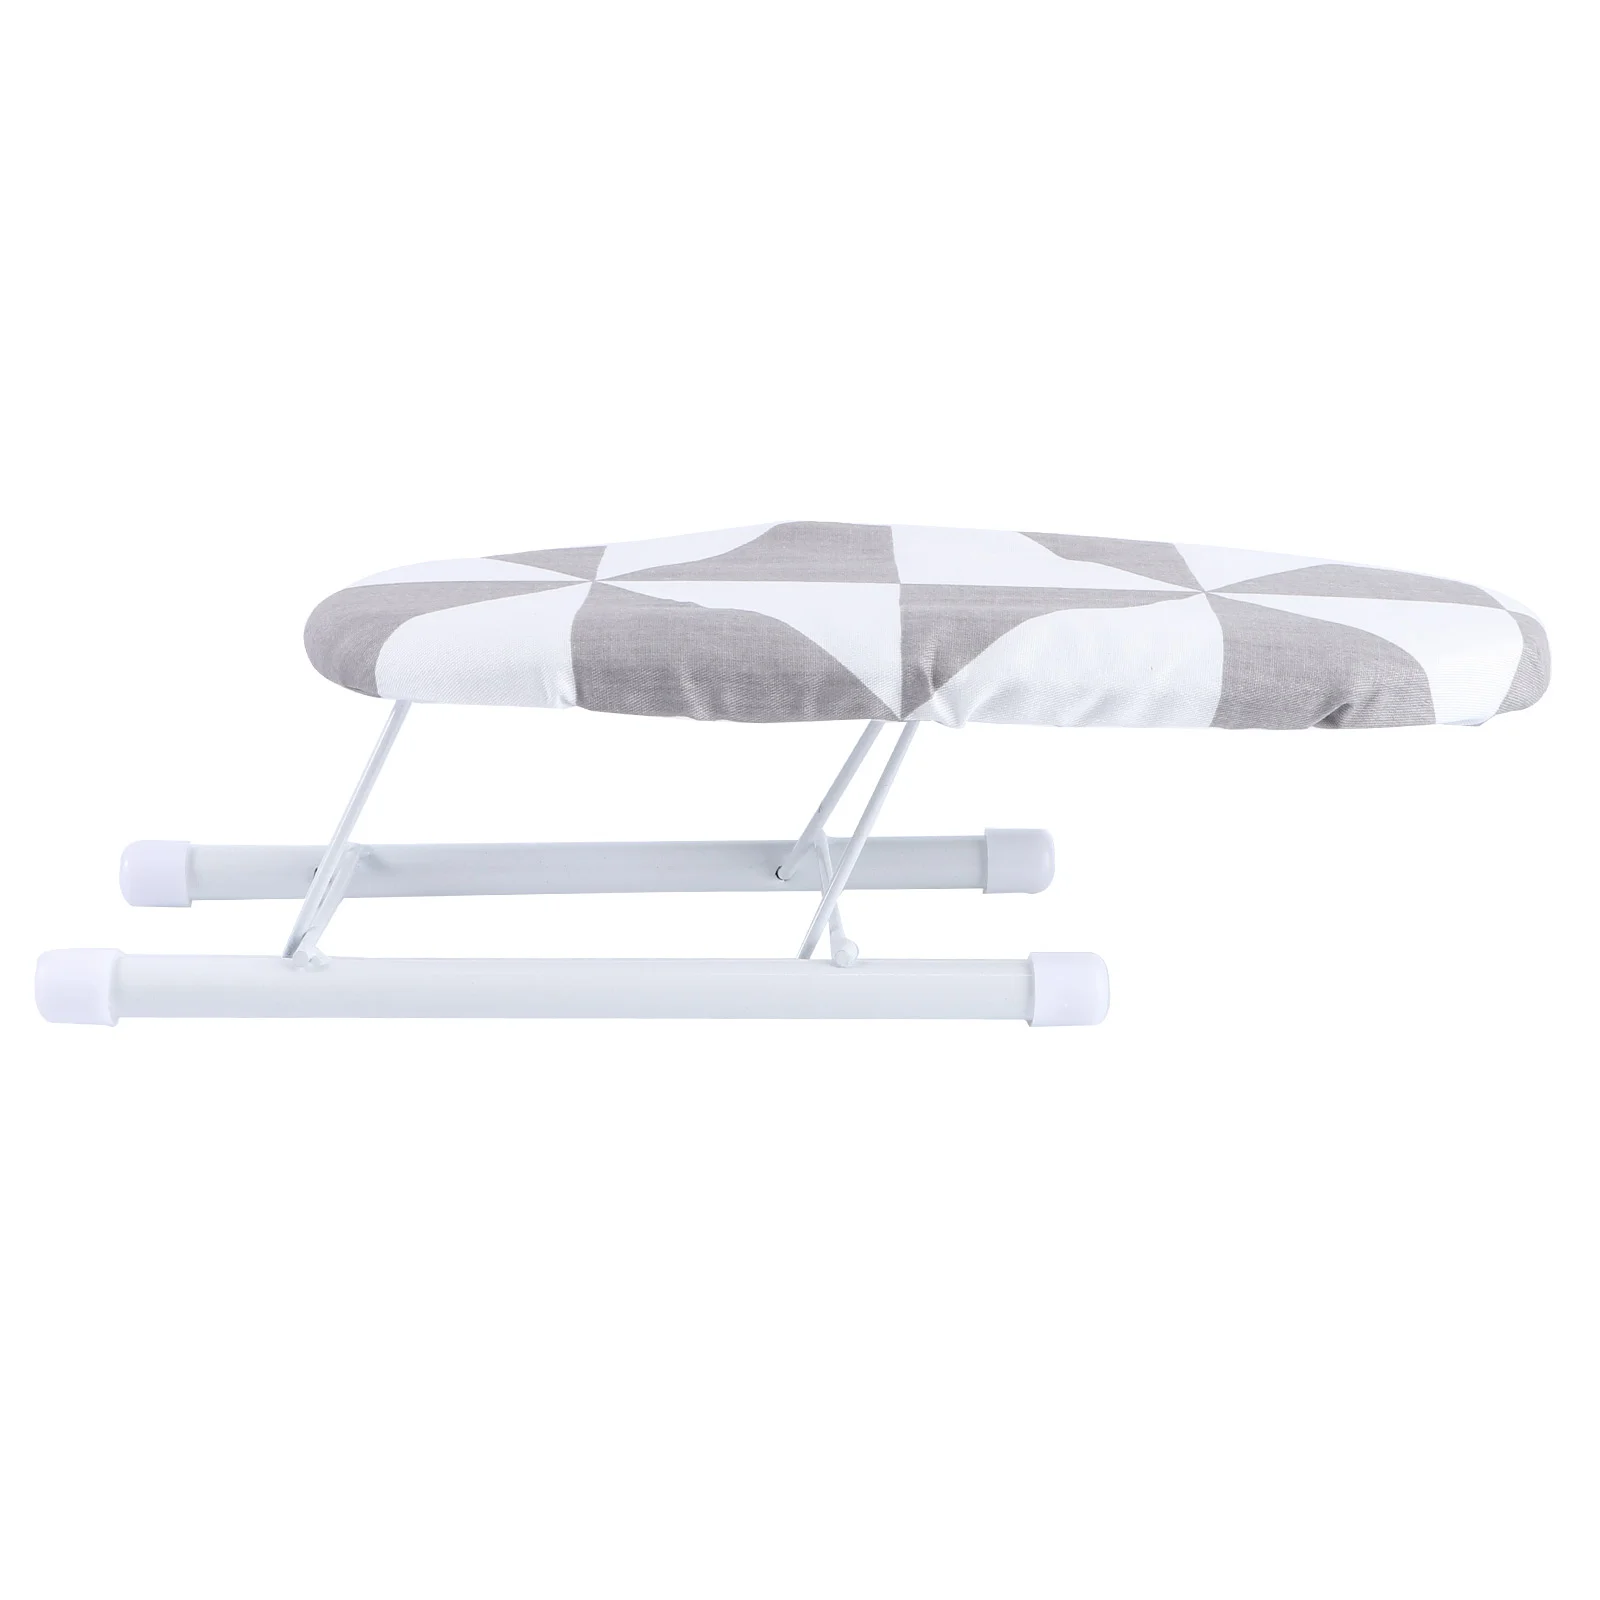 

Ironing Board Mini Sleeve Boards Rack Tabletop Folding Cotton Cover Saving Gifts Housewarming Space Legs Racks Clothes